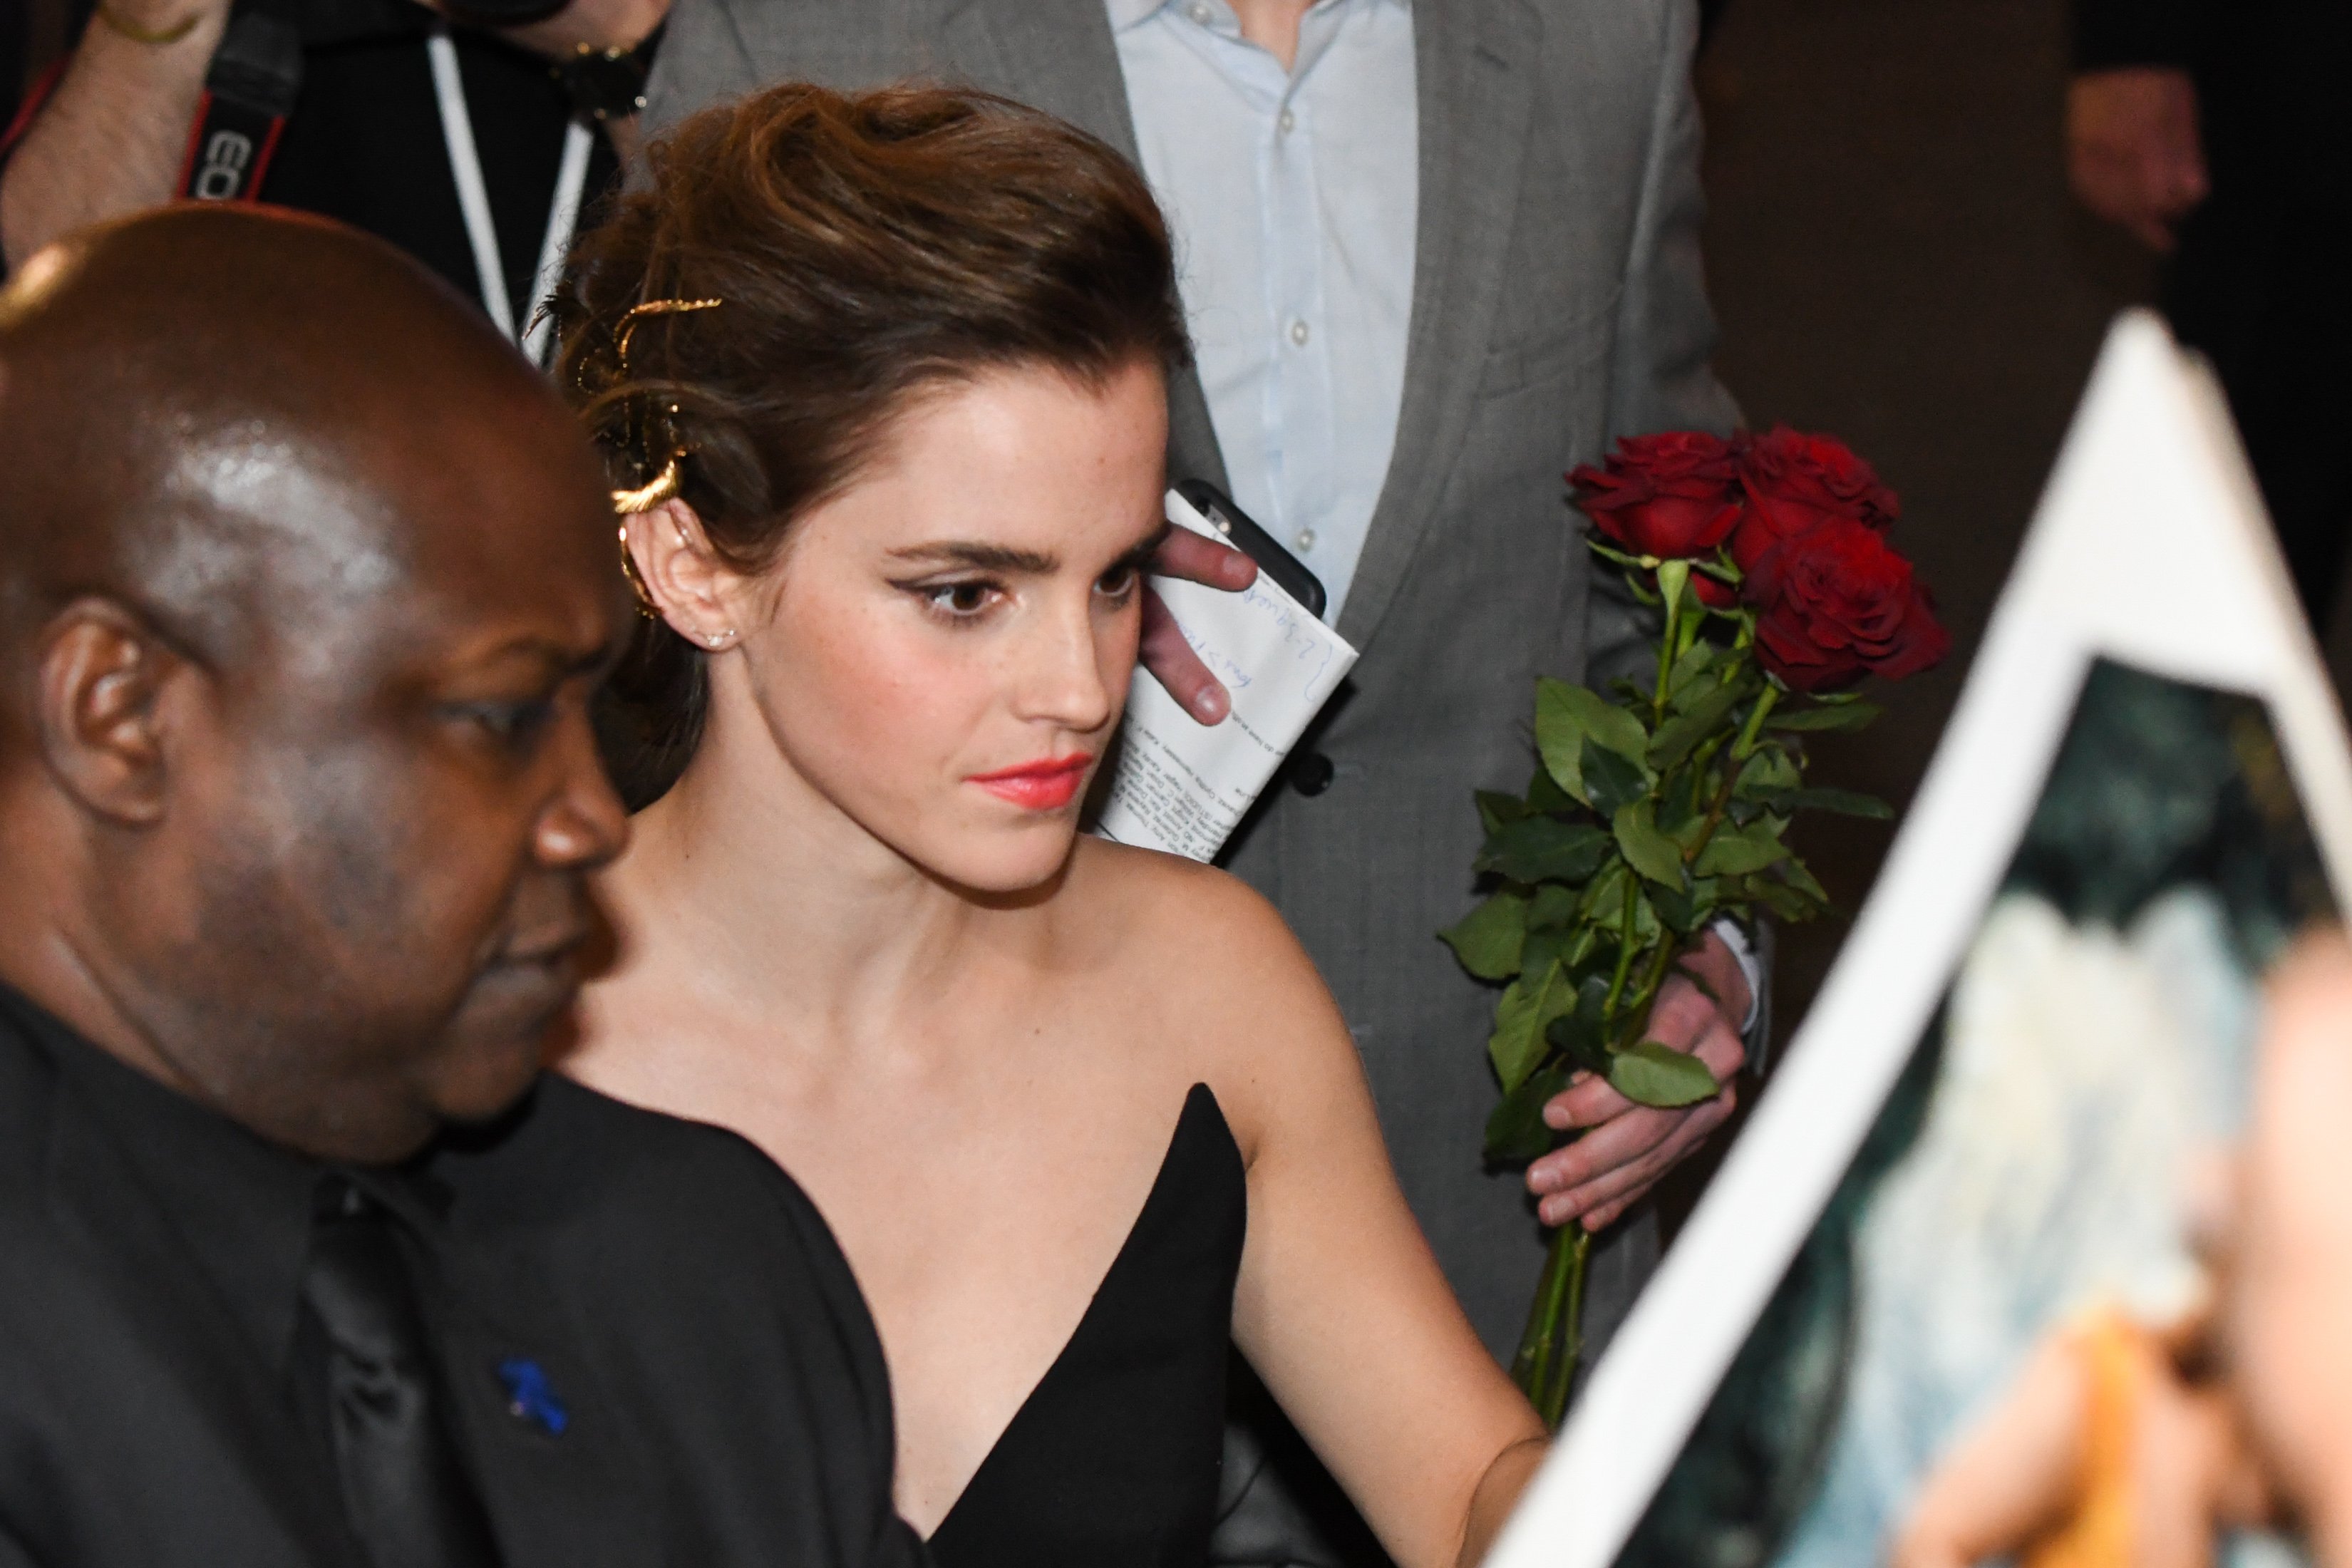 Emma Watson signs autographs for fans at the 2017 premiere of Beauty and the Beast